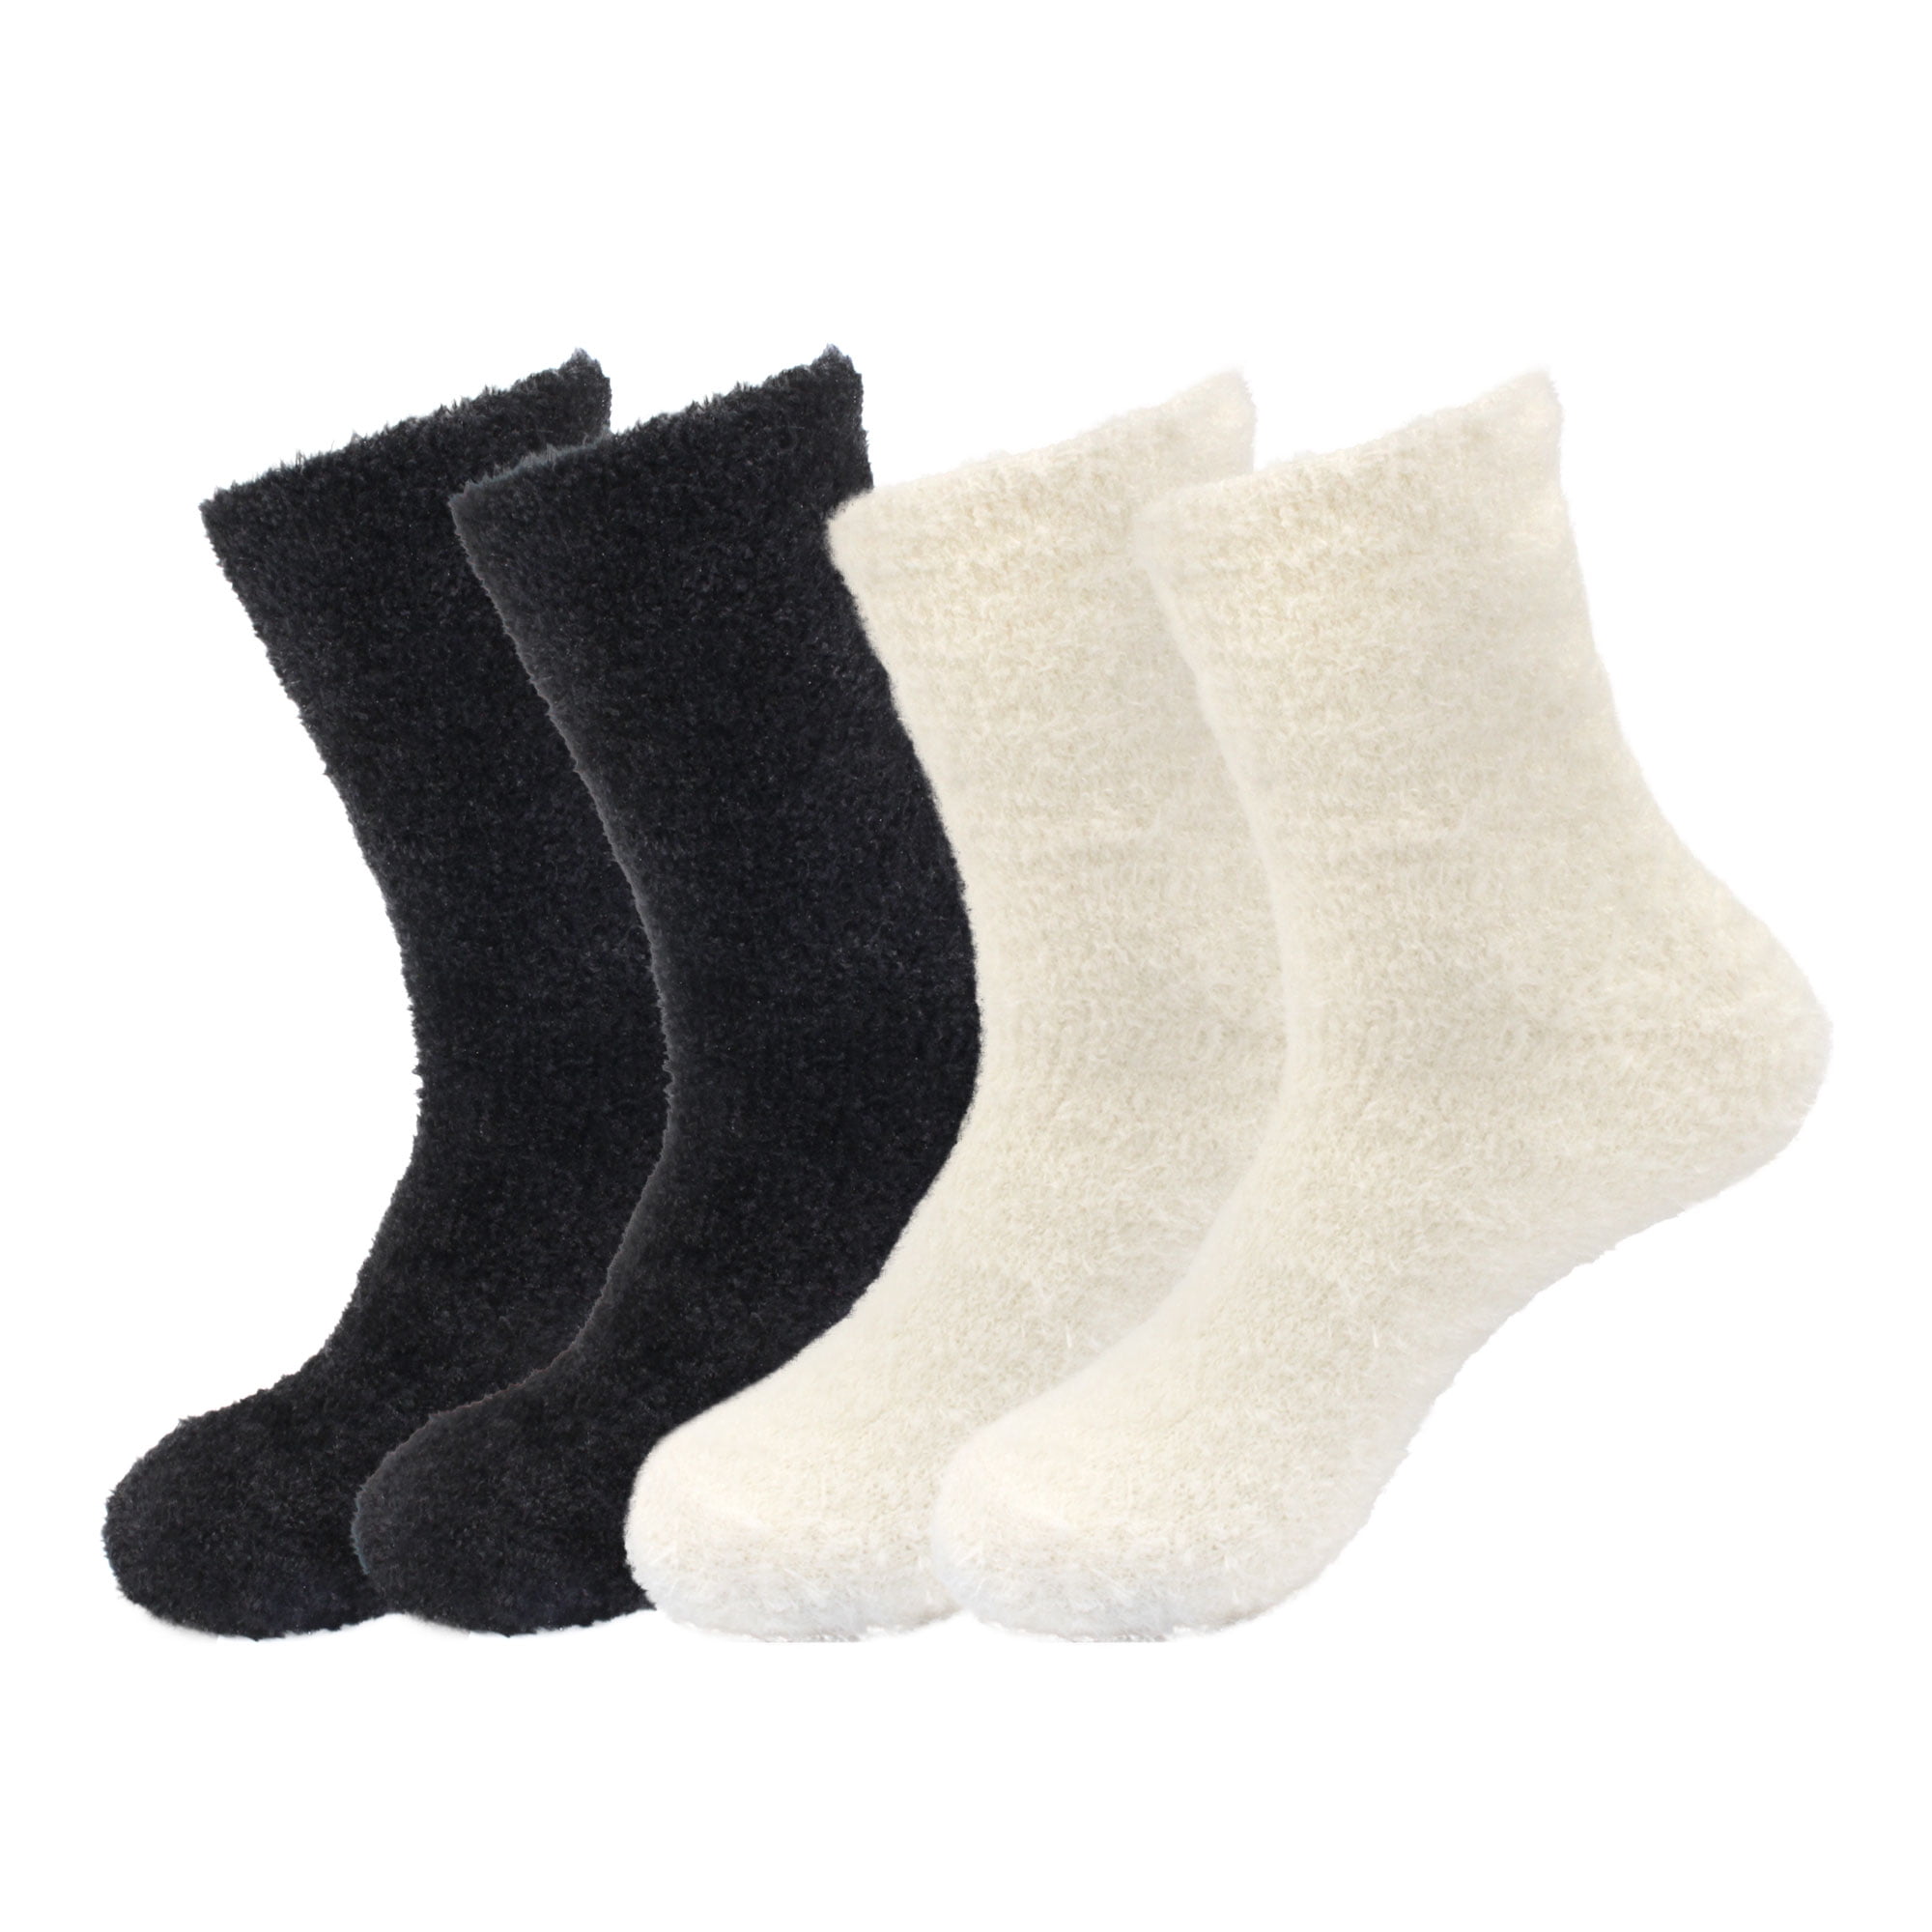 Women's Super Soft Extra Large Comfy Cozy Fun Fluffy Furry Plush Warm  Fuzzy Home Slipper Socks - Assortment A - 4 Pair Value Pack 